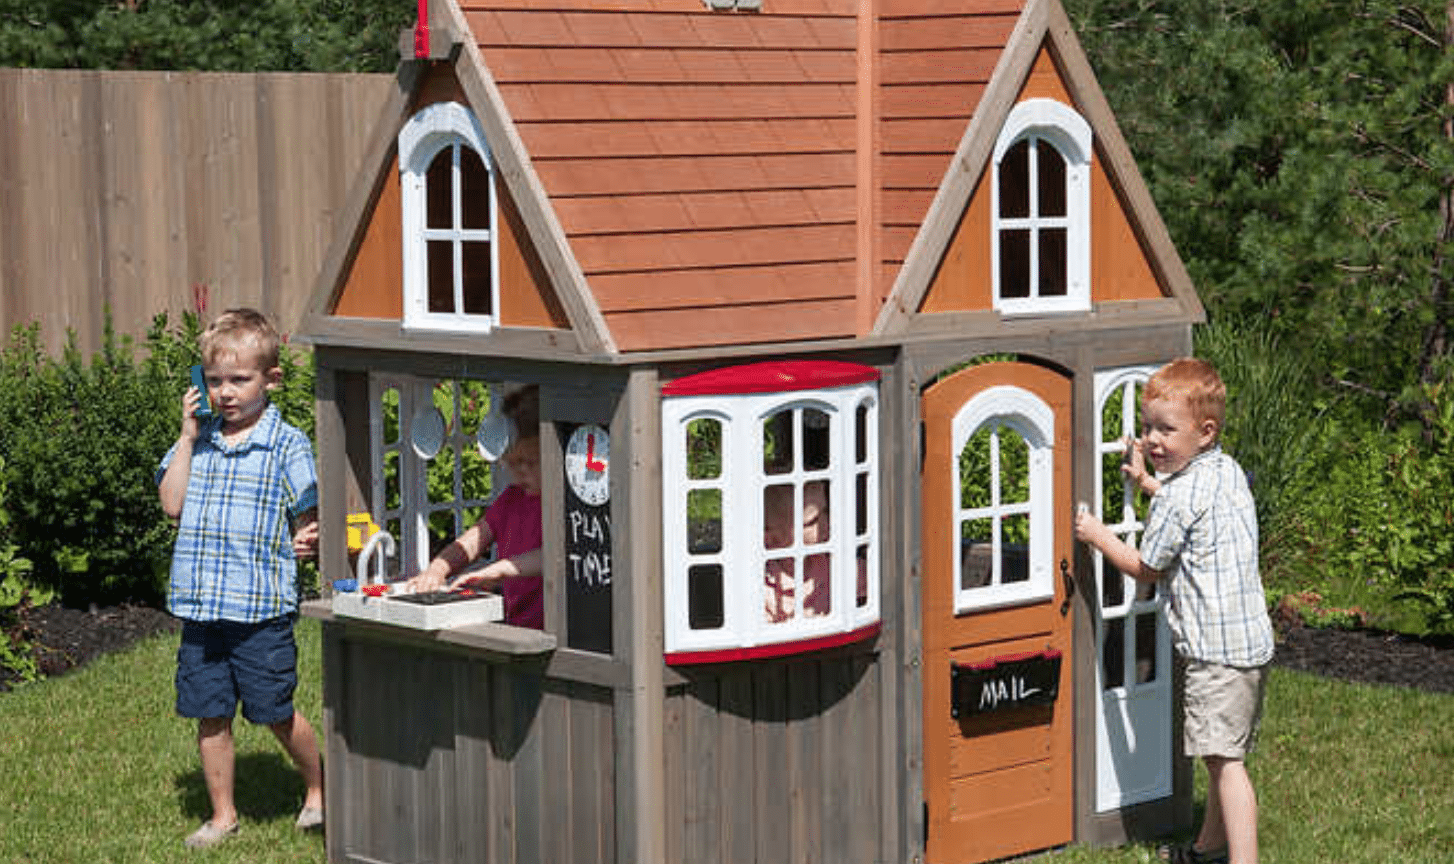 People are transforming this Costco playhouse into miniature dream